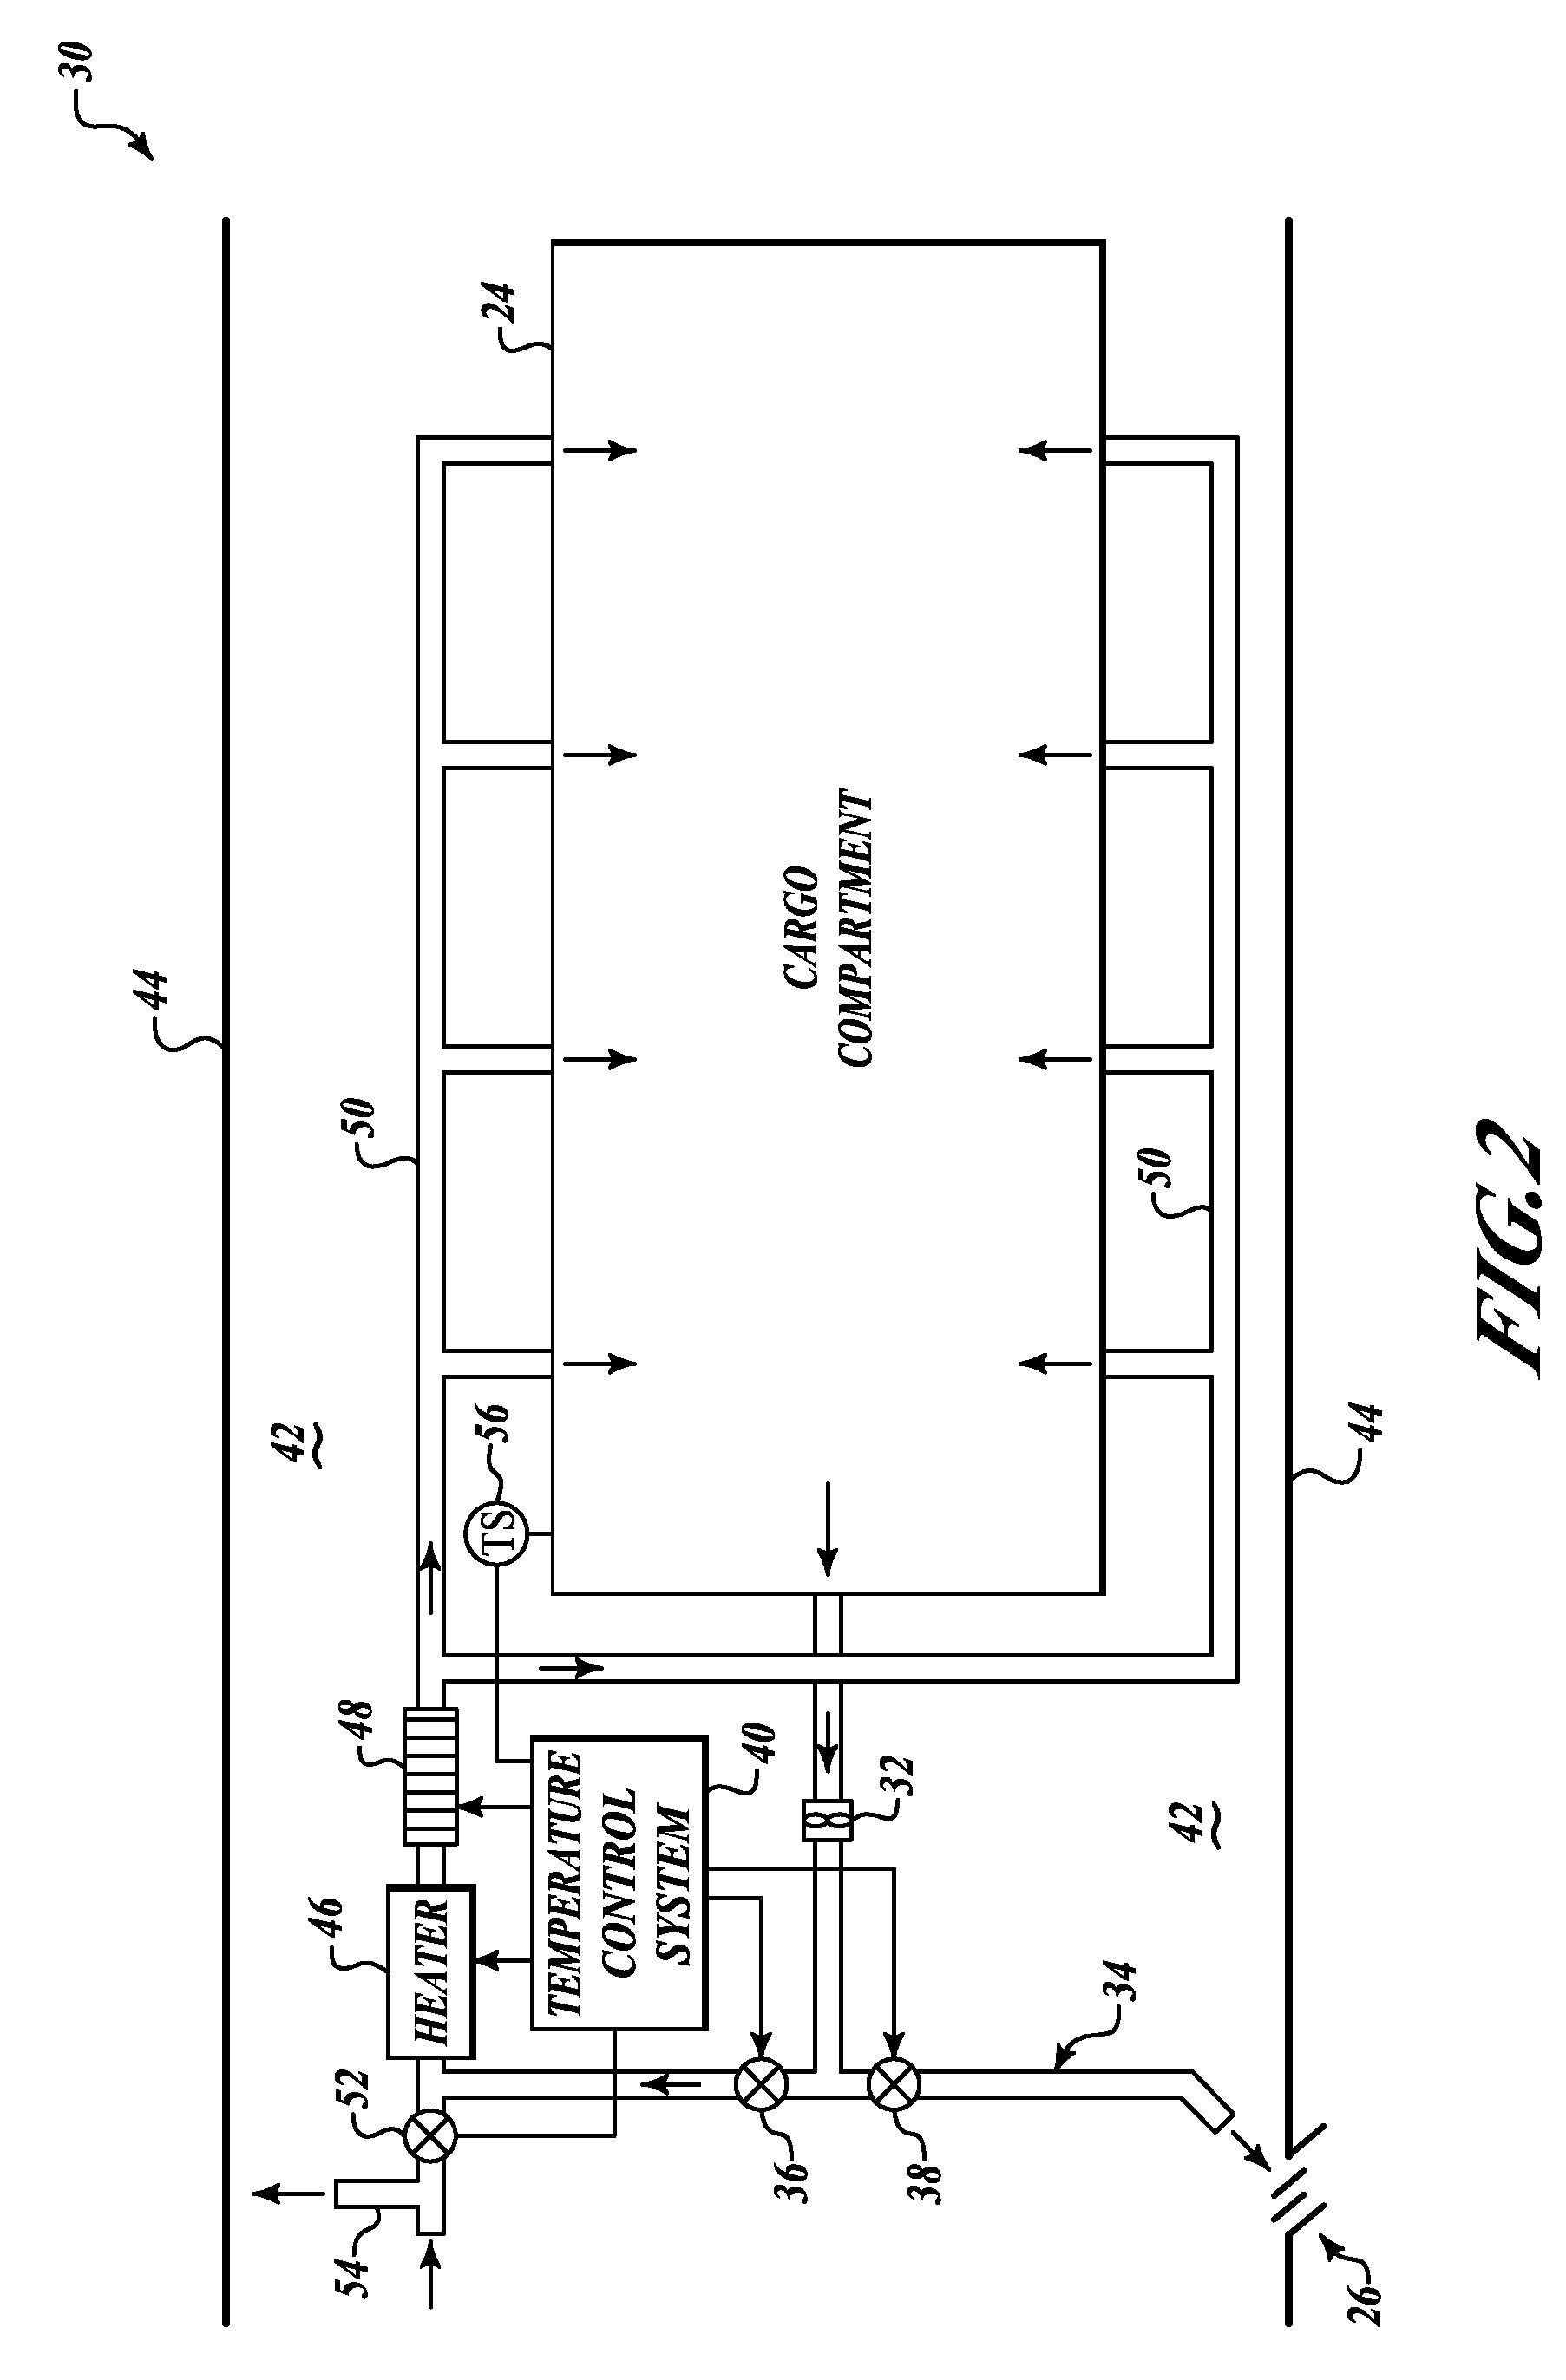 Systems and methods for cargo compartment air conditioning using recirculated air